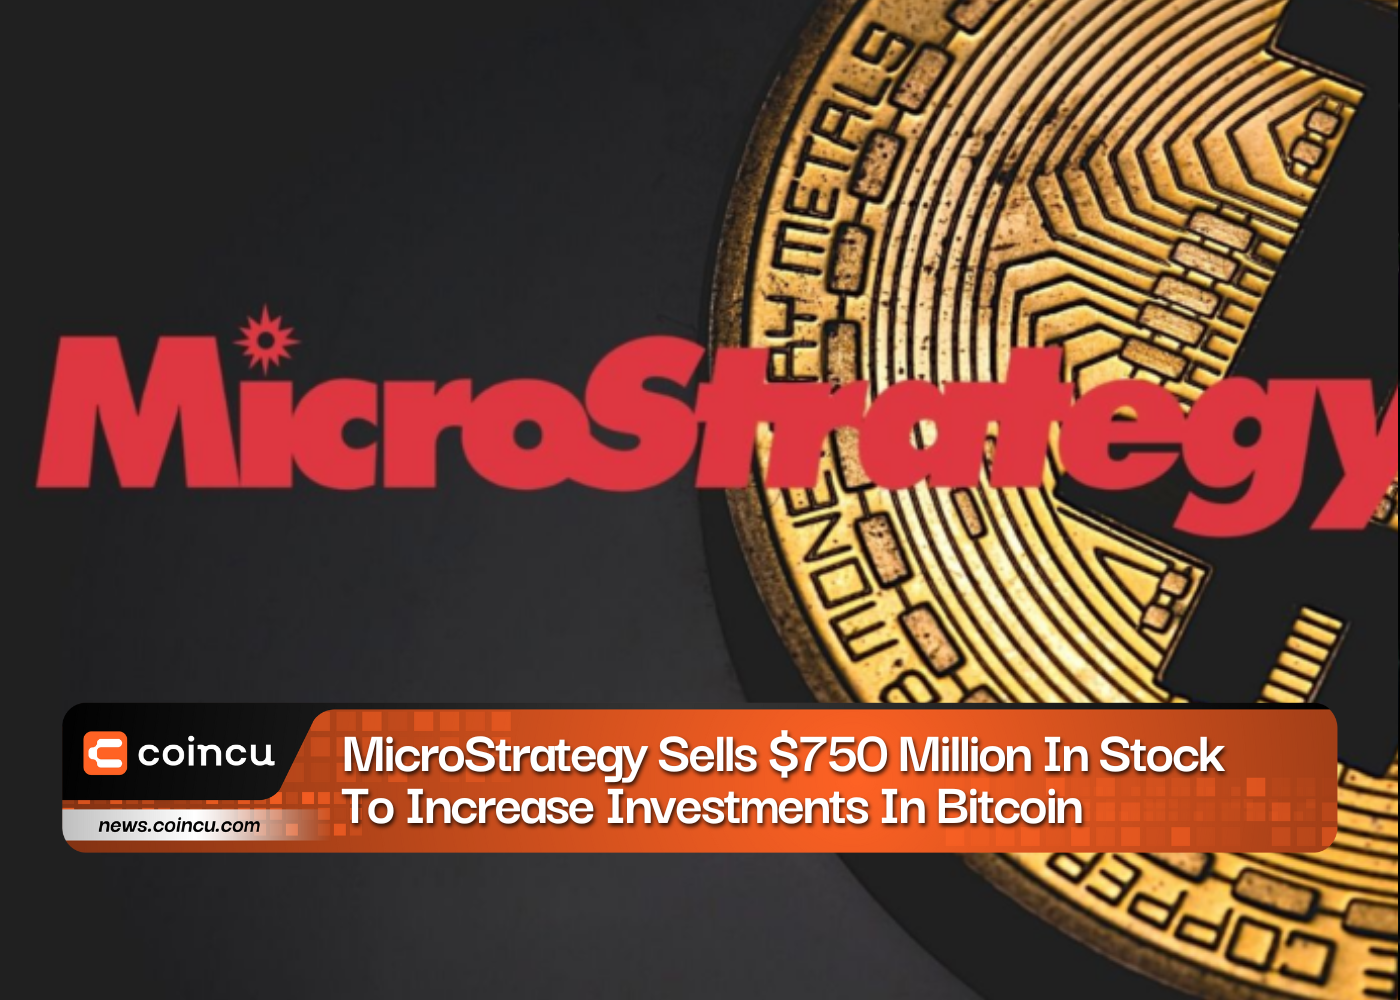 MicroStrategy Sells $750 Million In Stock To Increase Investments In Bitcoin